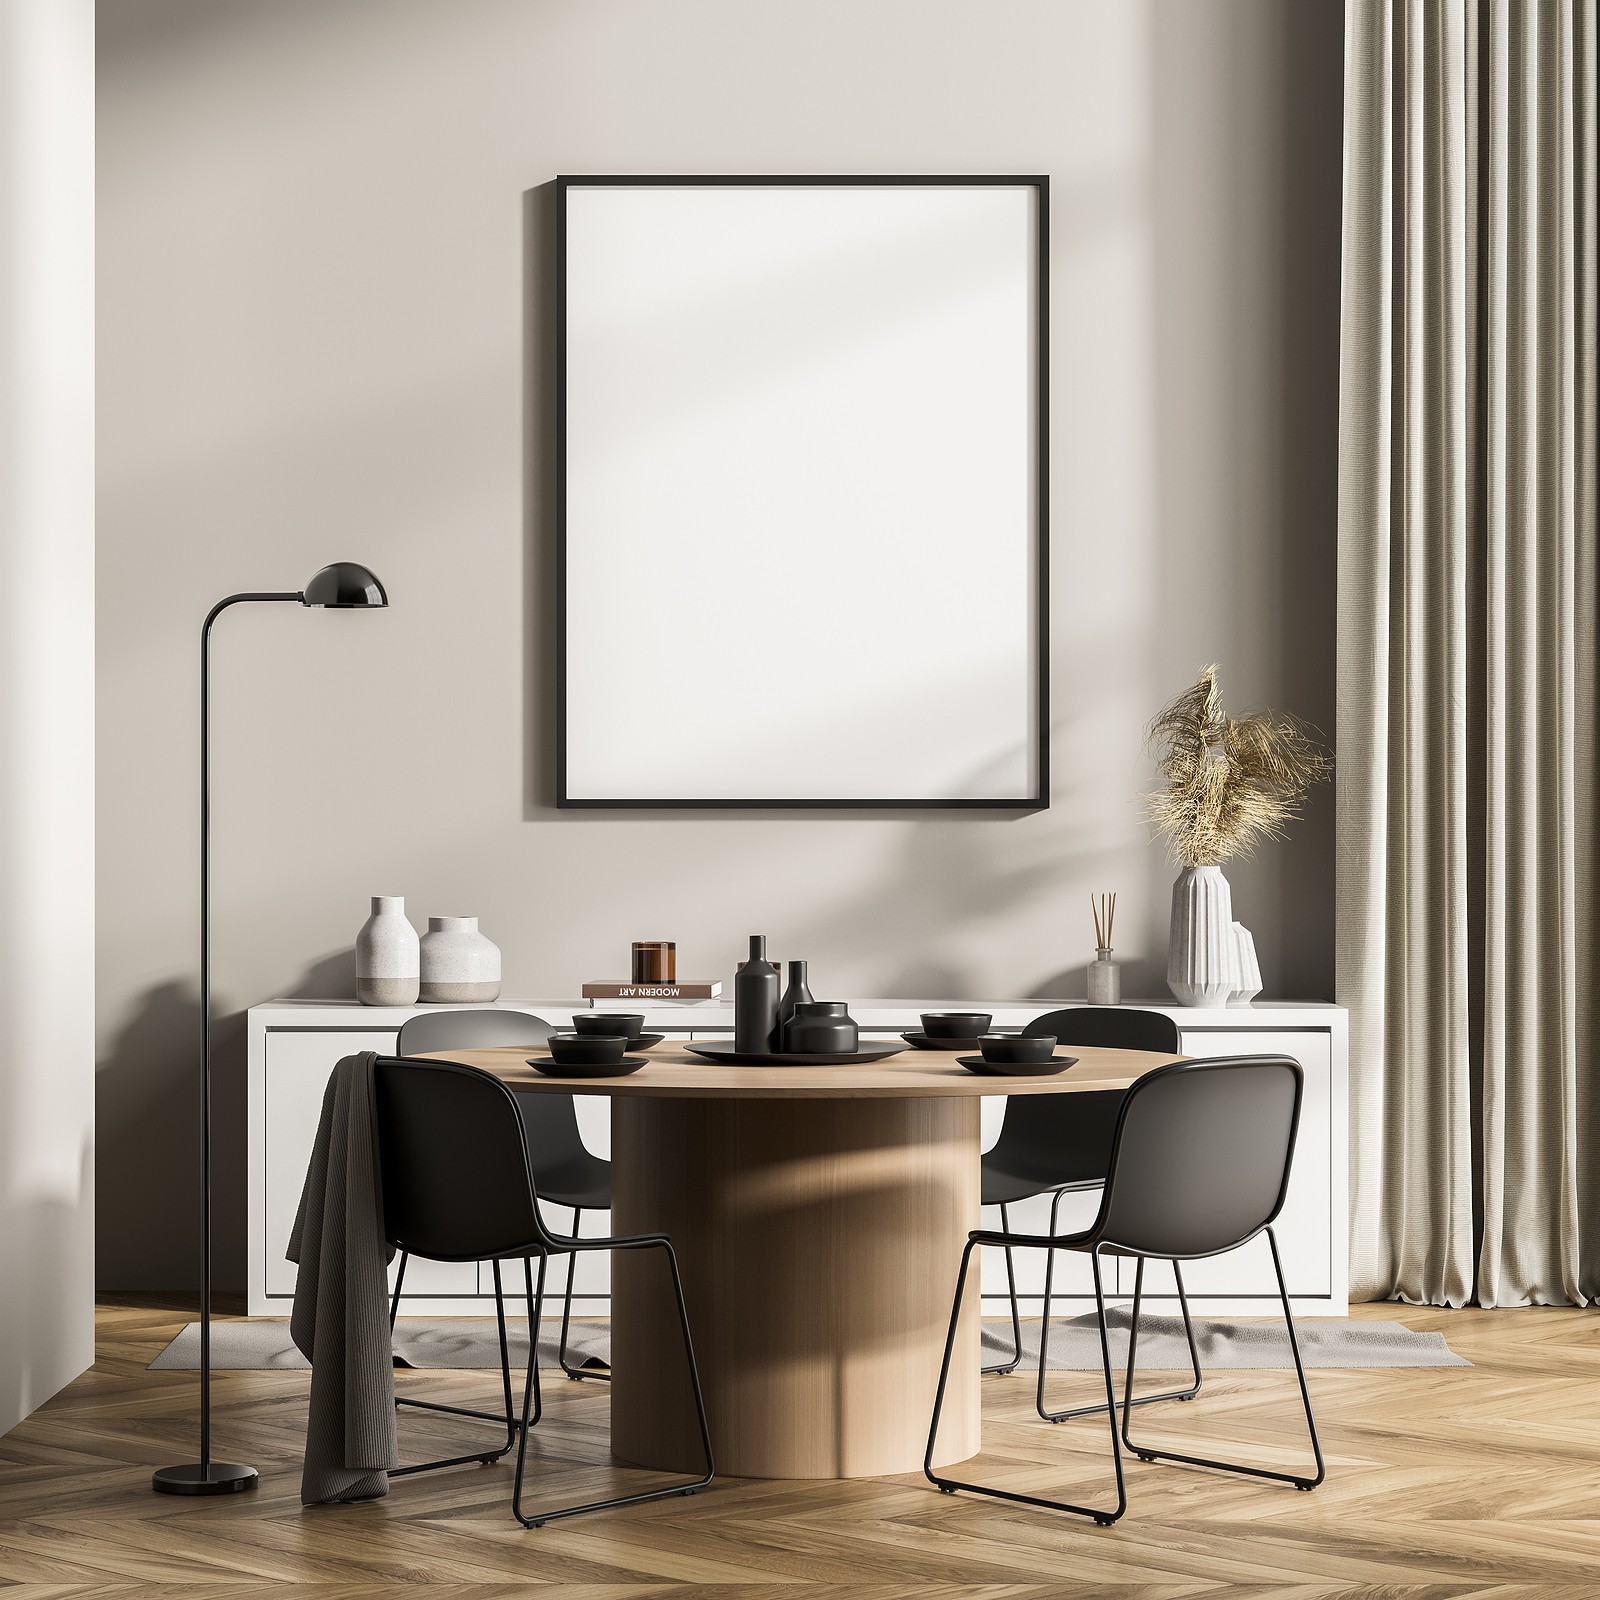 modern dining set with plain decorations